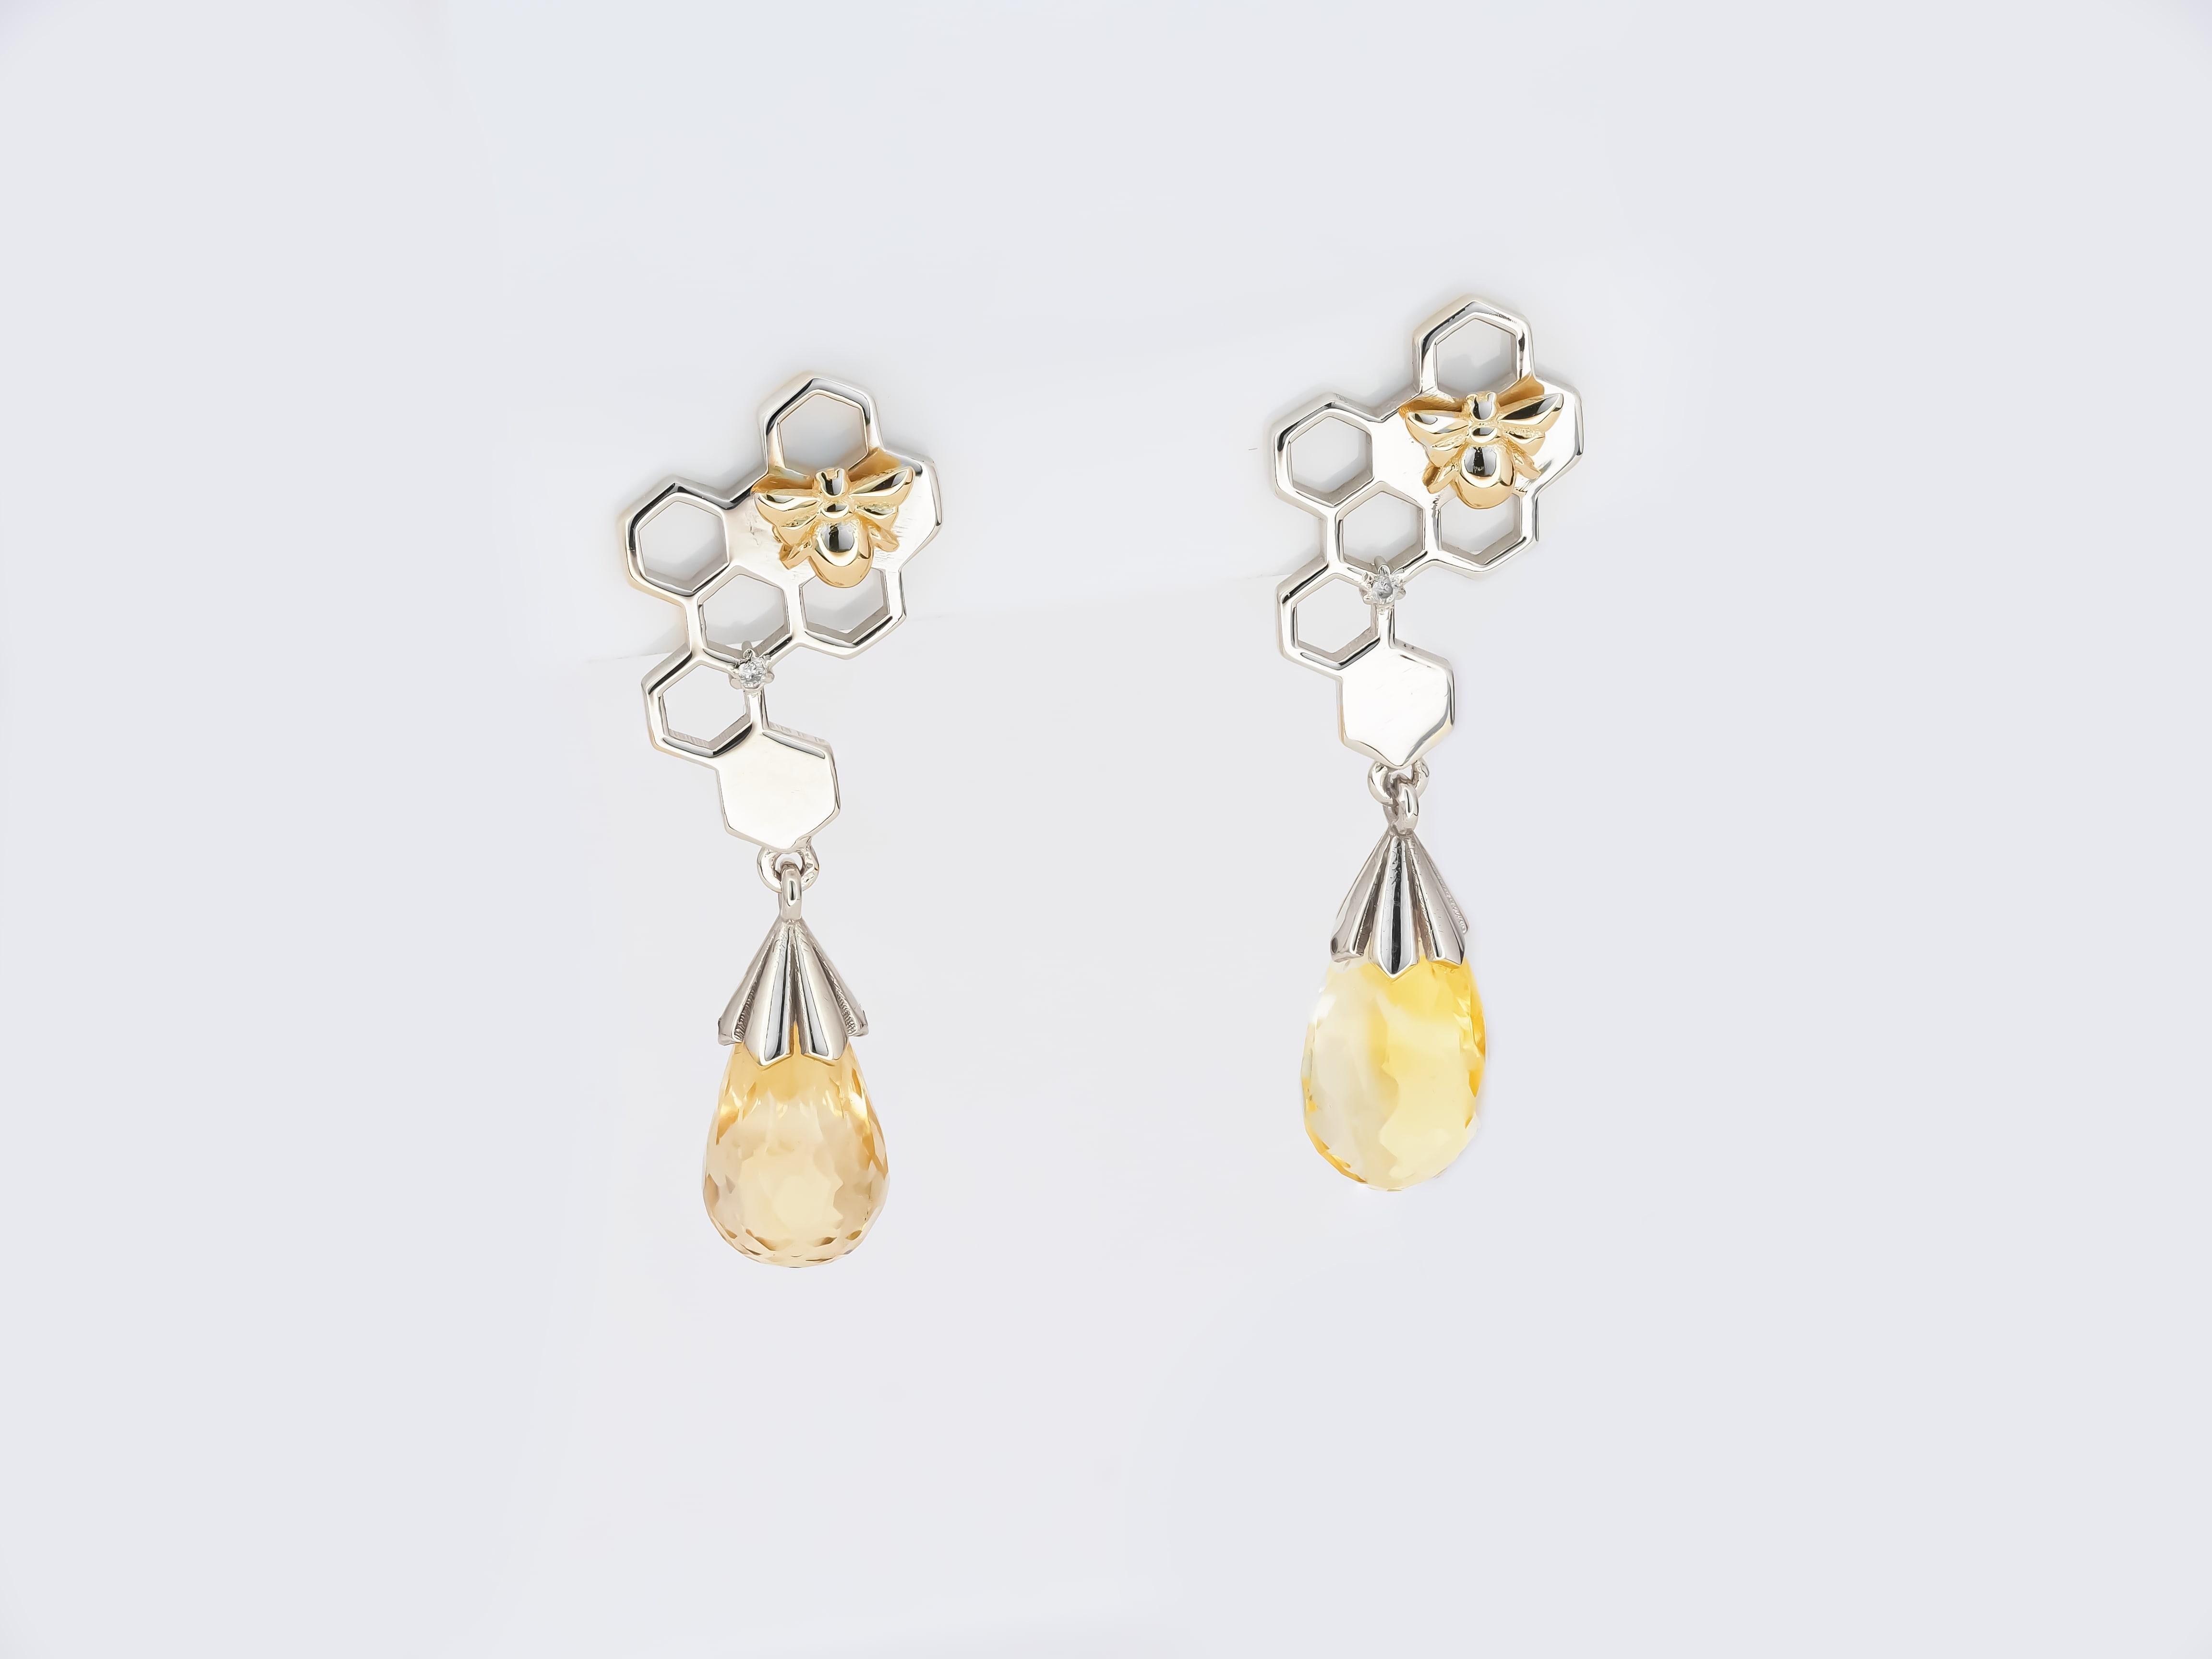 Bee on honeycomb 14 kt solid gold earrings studs with natural citrines briolettes. November birthstone earrings studs. Contemporary design earrings.
Gold: white and yellow (bee) 14kt solid gold.
Earrings size: 33 x 11.3 mm.
Total Weight:  3 g. can